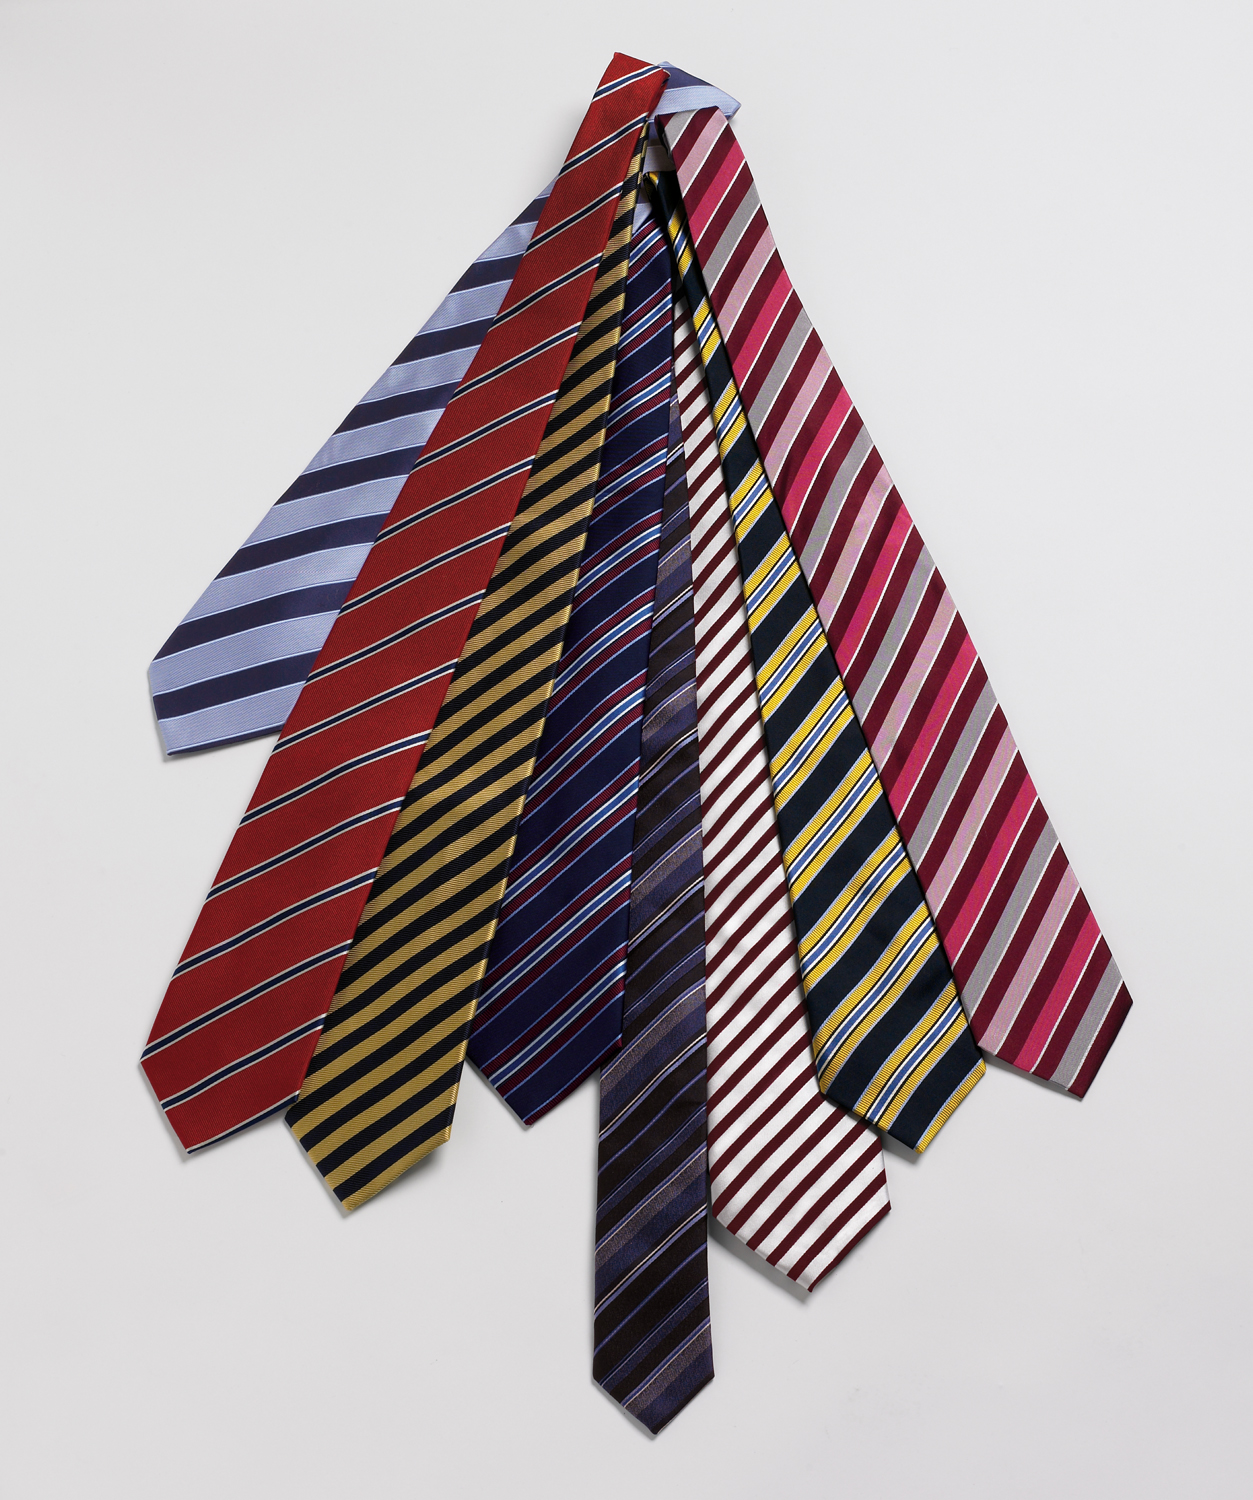 Press release:SKINNY AND RED ARE MOST POPULAR CHOICE FOR MEN’S TIES